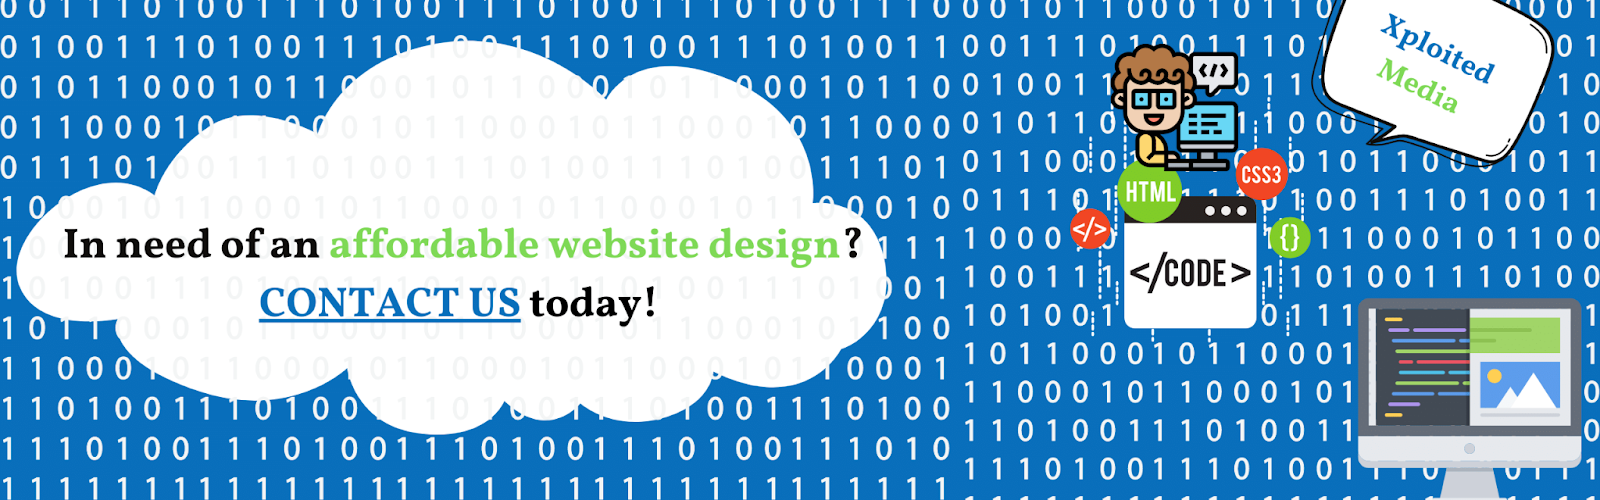 In need of affordable website design services? contact us today!
